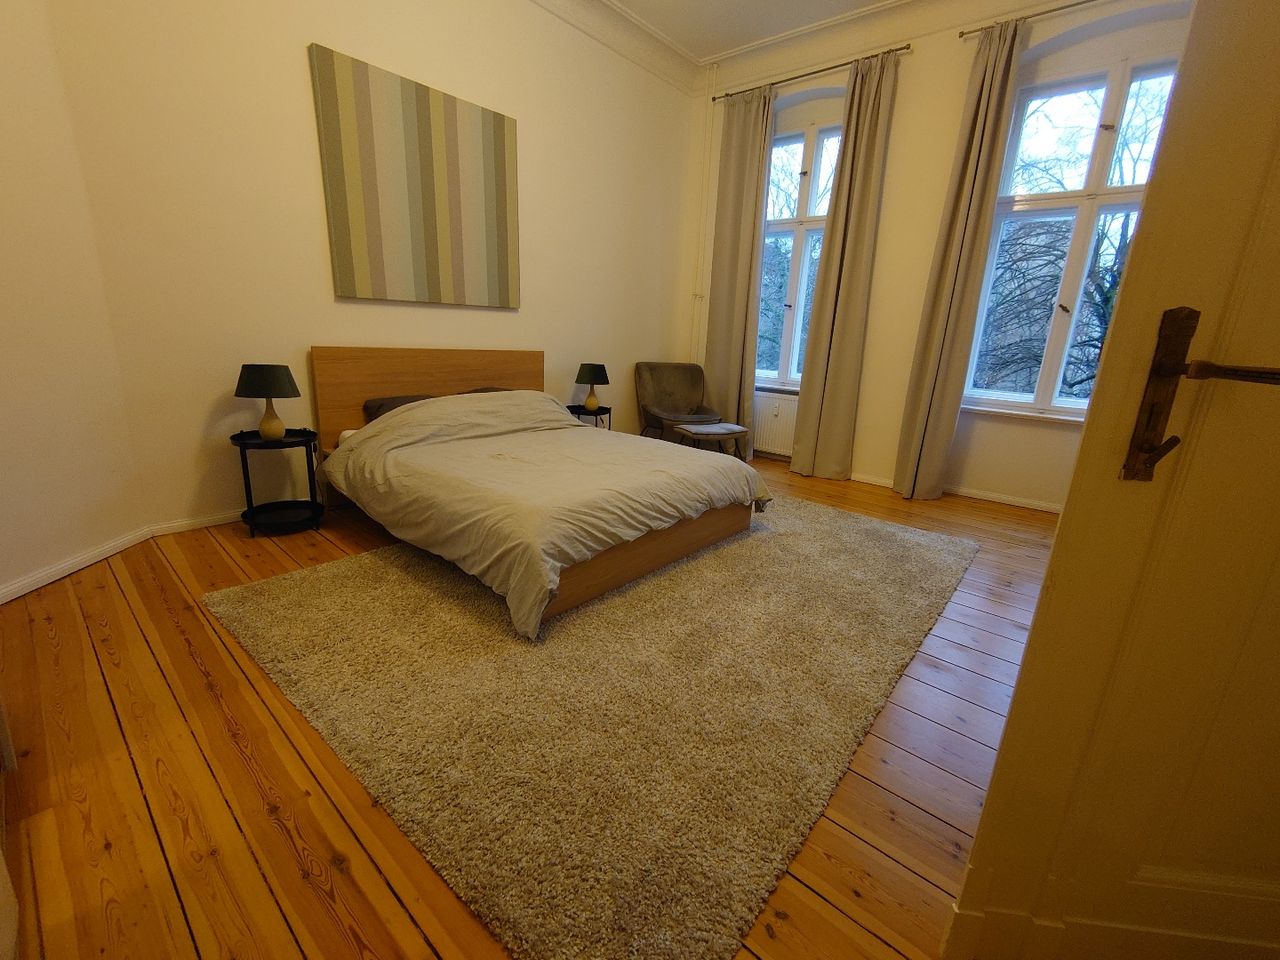 2 Bedroom Apartment in Neukölln fully furnished